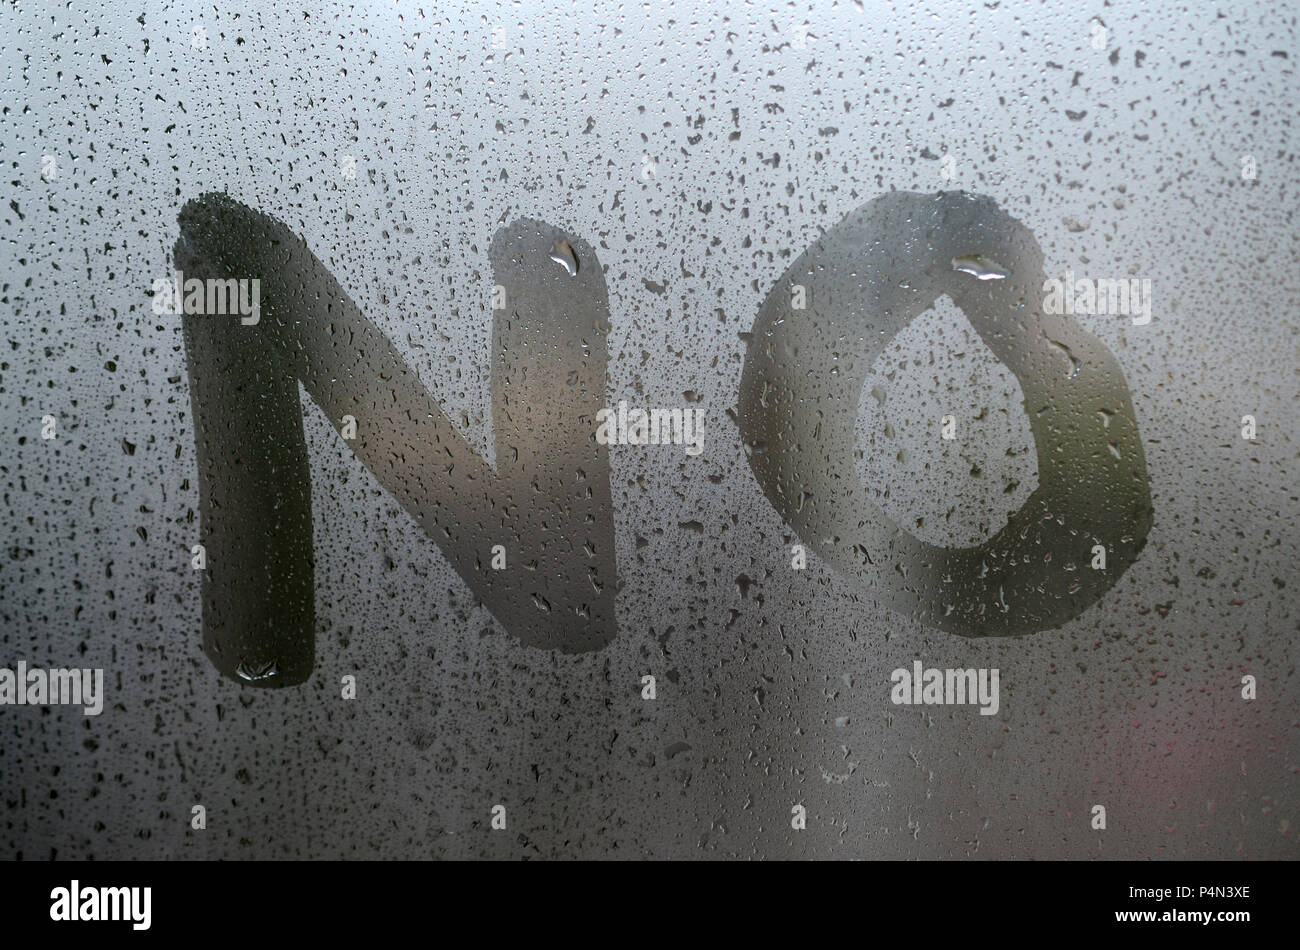 The English word No is written with a finger on the surface of the misted glass . Stock Photo